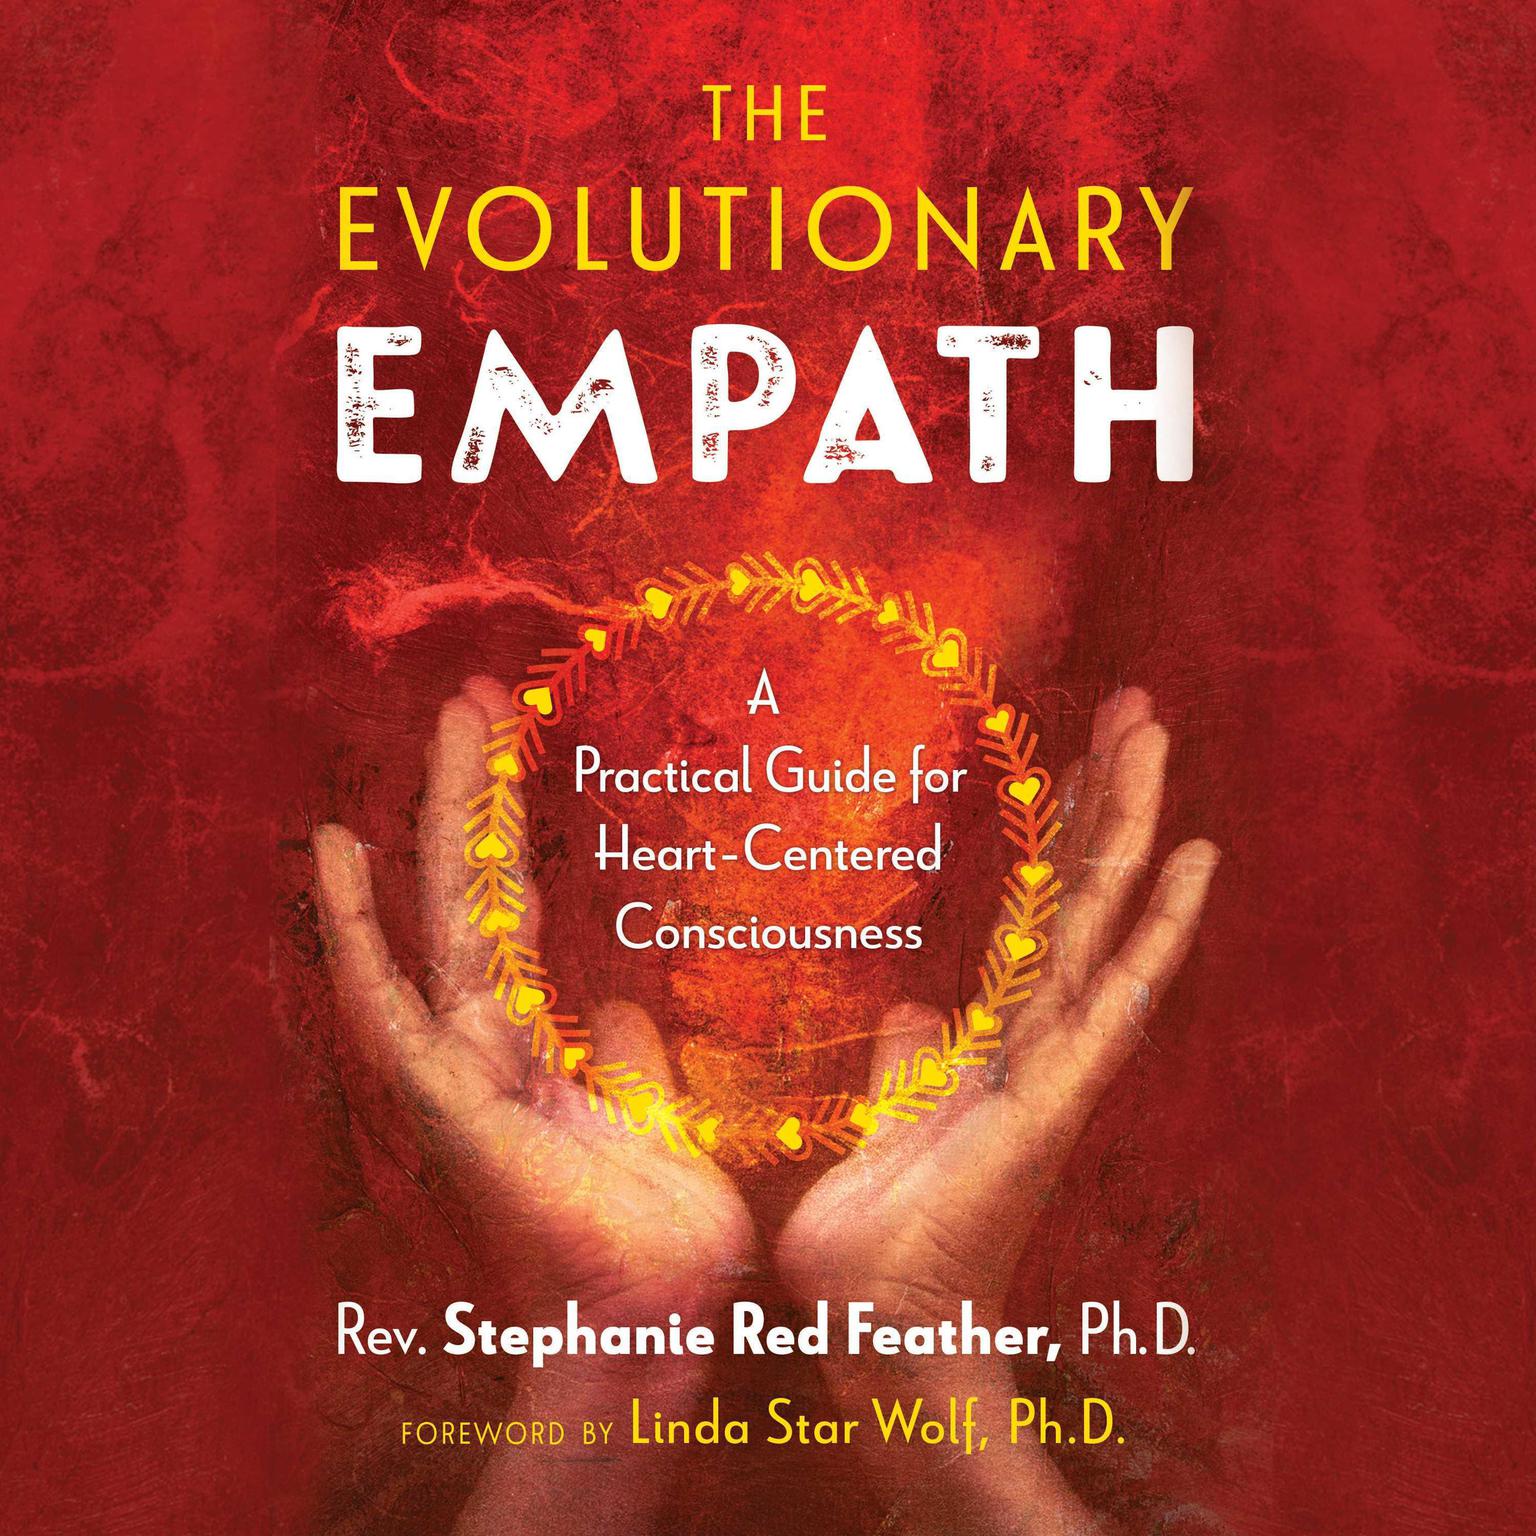 The Evolutionary Empath: A Practical Guide for Heart-Centered Consciousness Audiobook, by Rev. Stephanie Red Feather